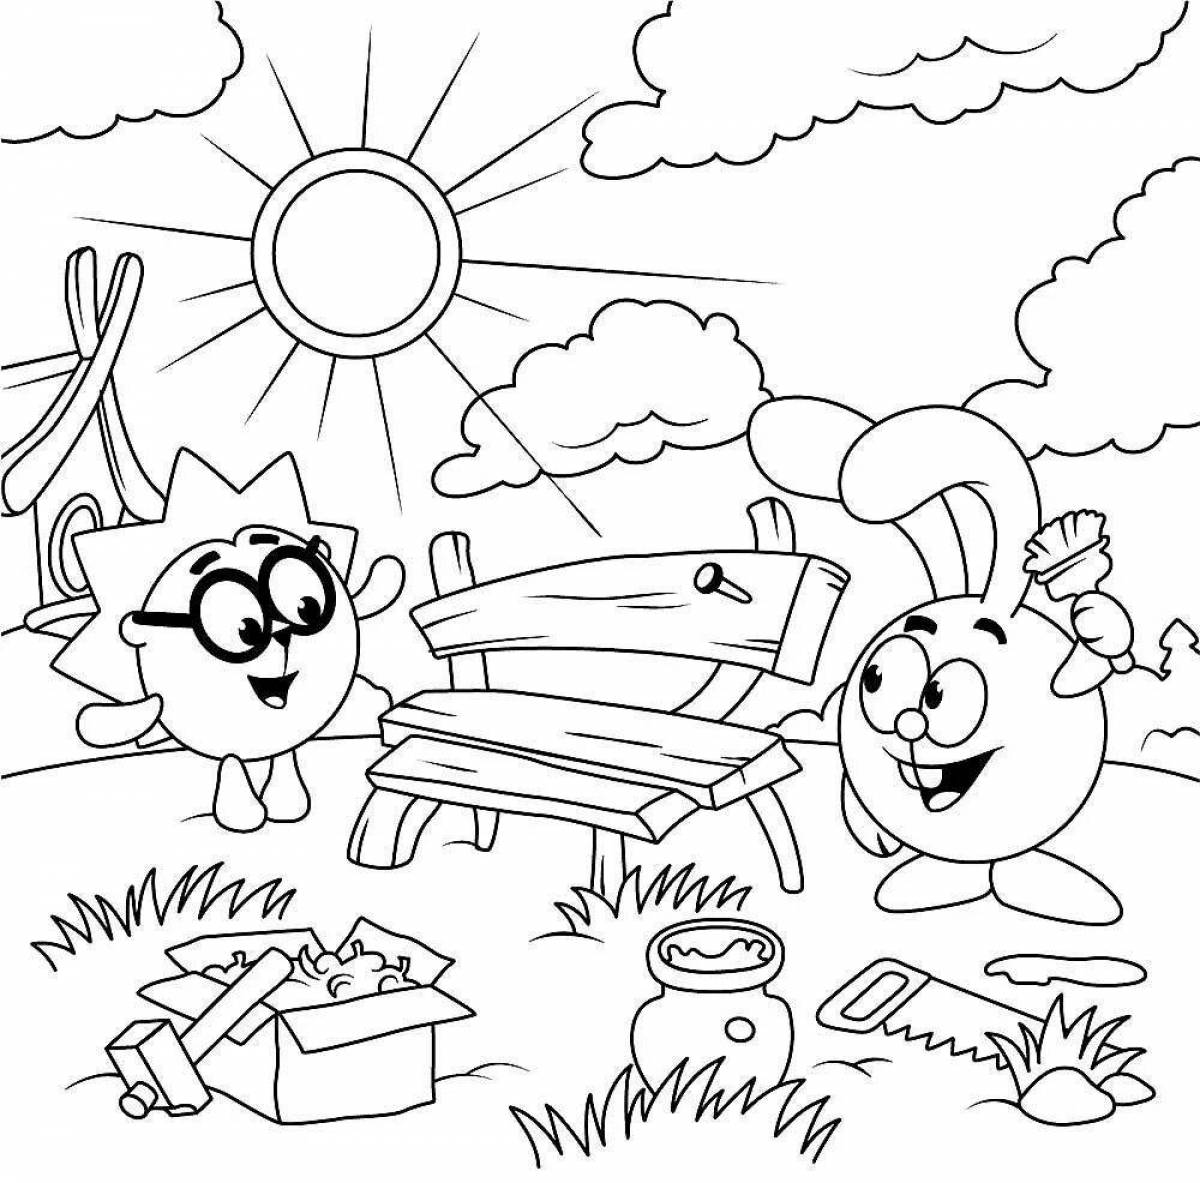 Colour-crazy baby and hedgehog coloring book